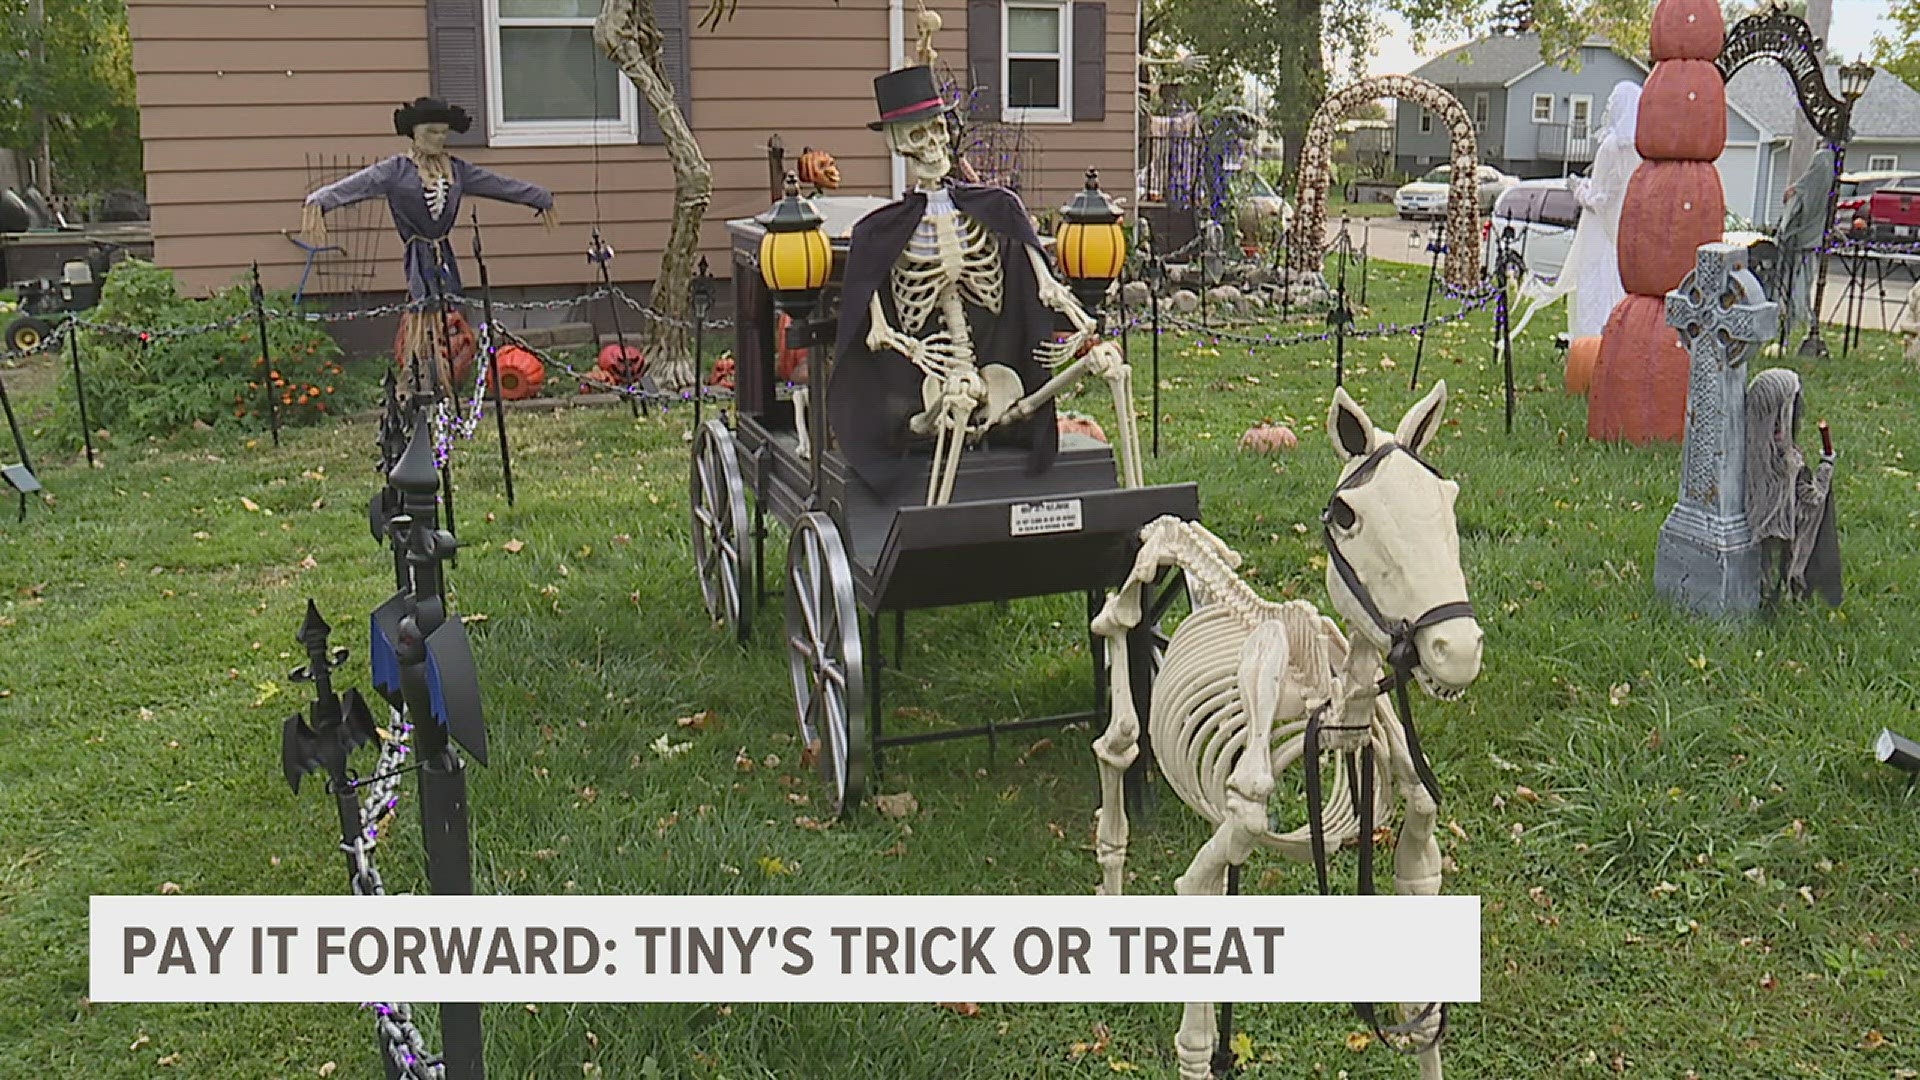 Anna and Sean Svec host their annual Tiny's Trick or Treat at their house. Creating a fun display for kids of all ages to make the night memorable.